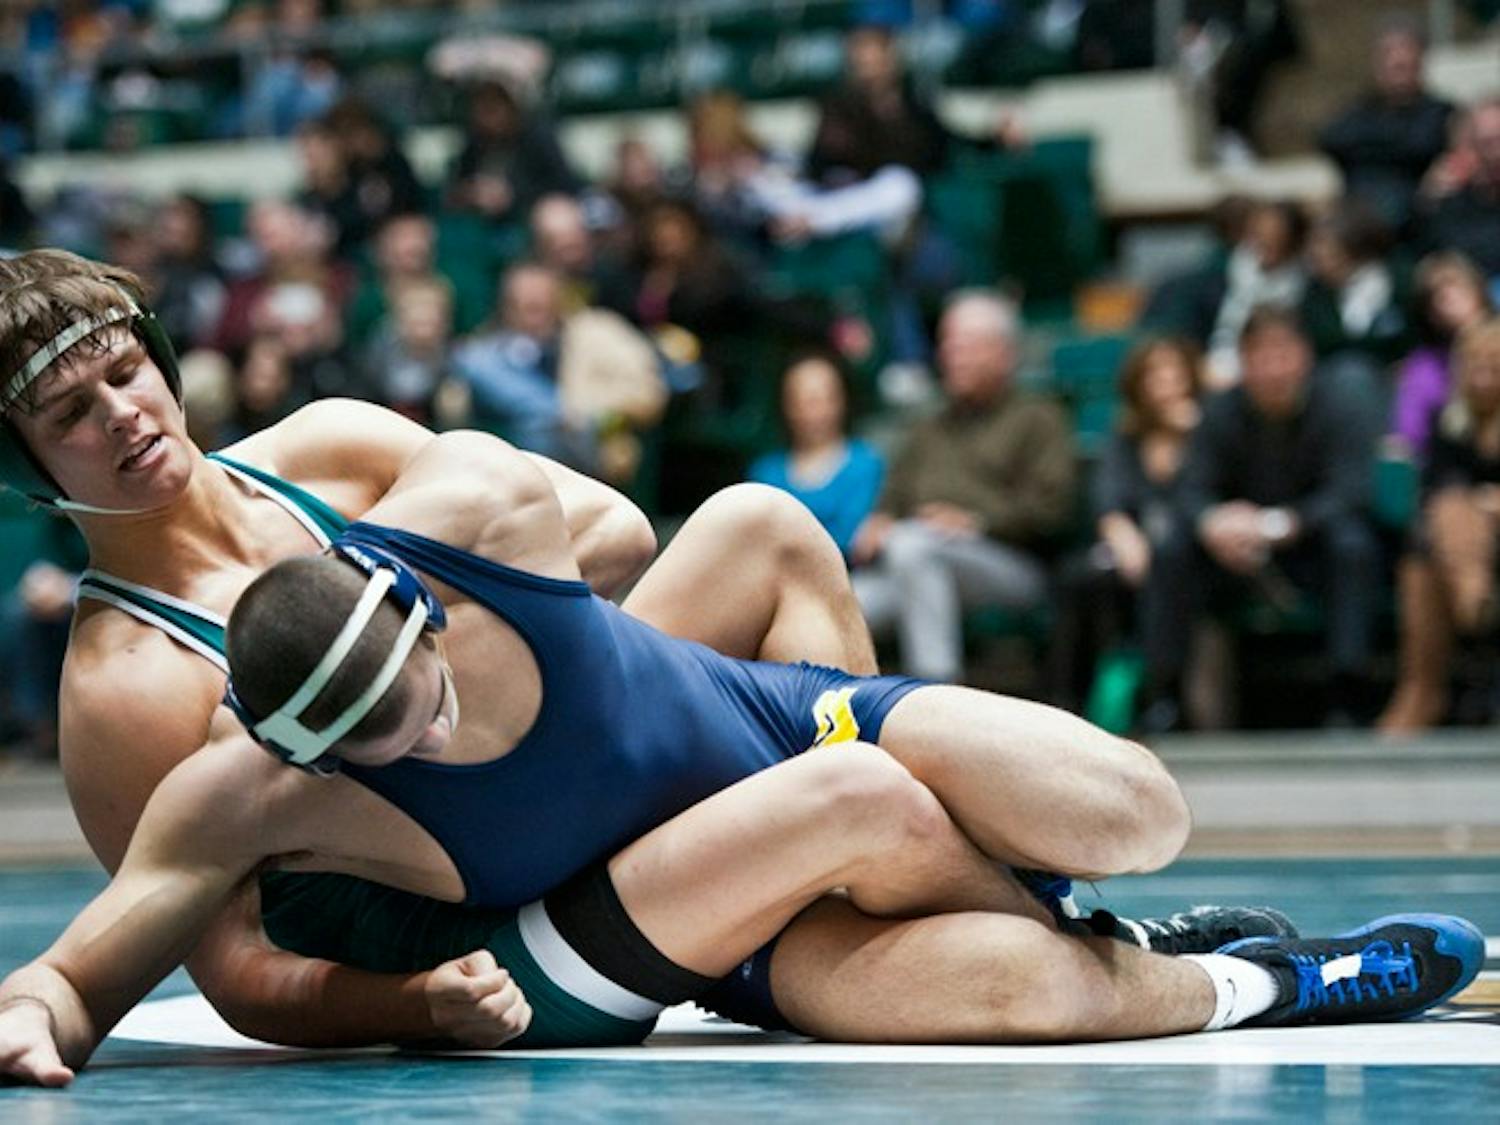 Wrestling: 'Cats wrestle 2 wins out of 3 weekend road matches  